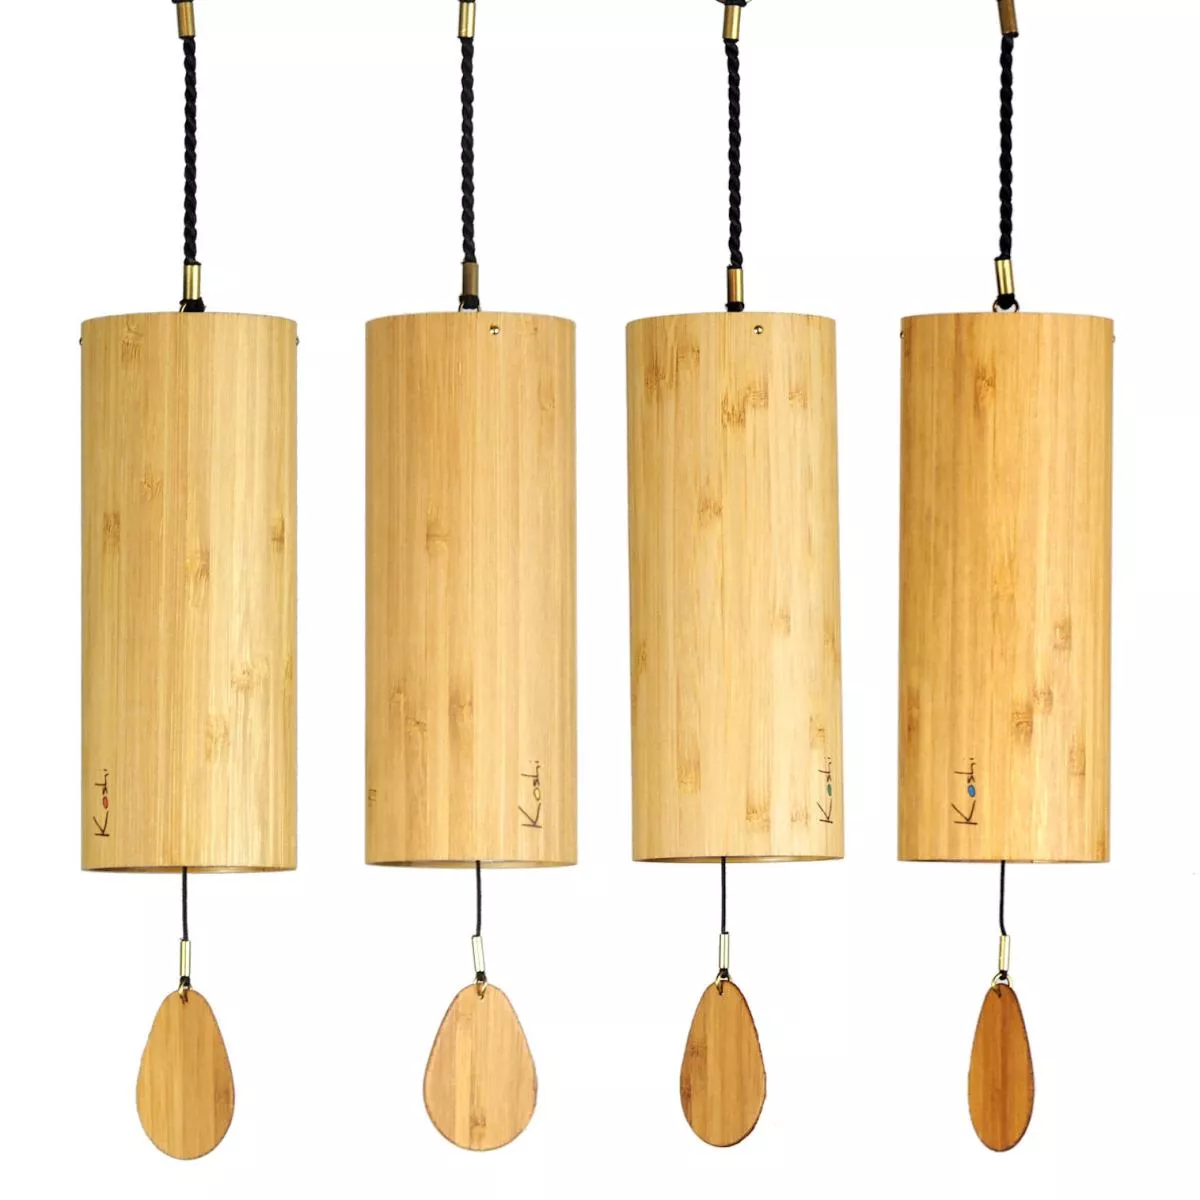 Set of Four Handcrafted Wind Chimes "Terra, Aqua, Aria, Ignis" with Bamboo Cylinders